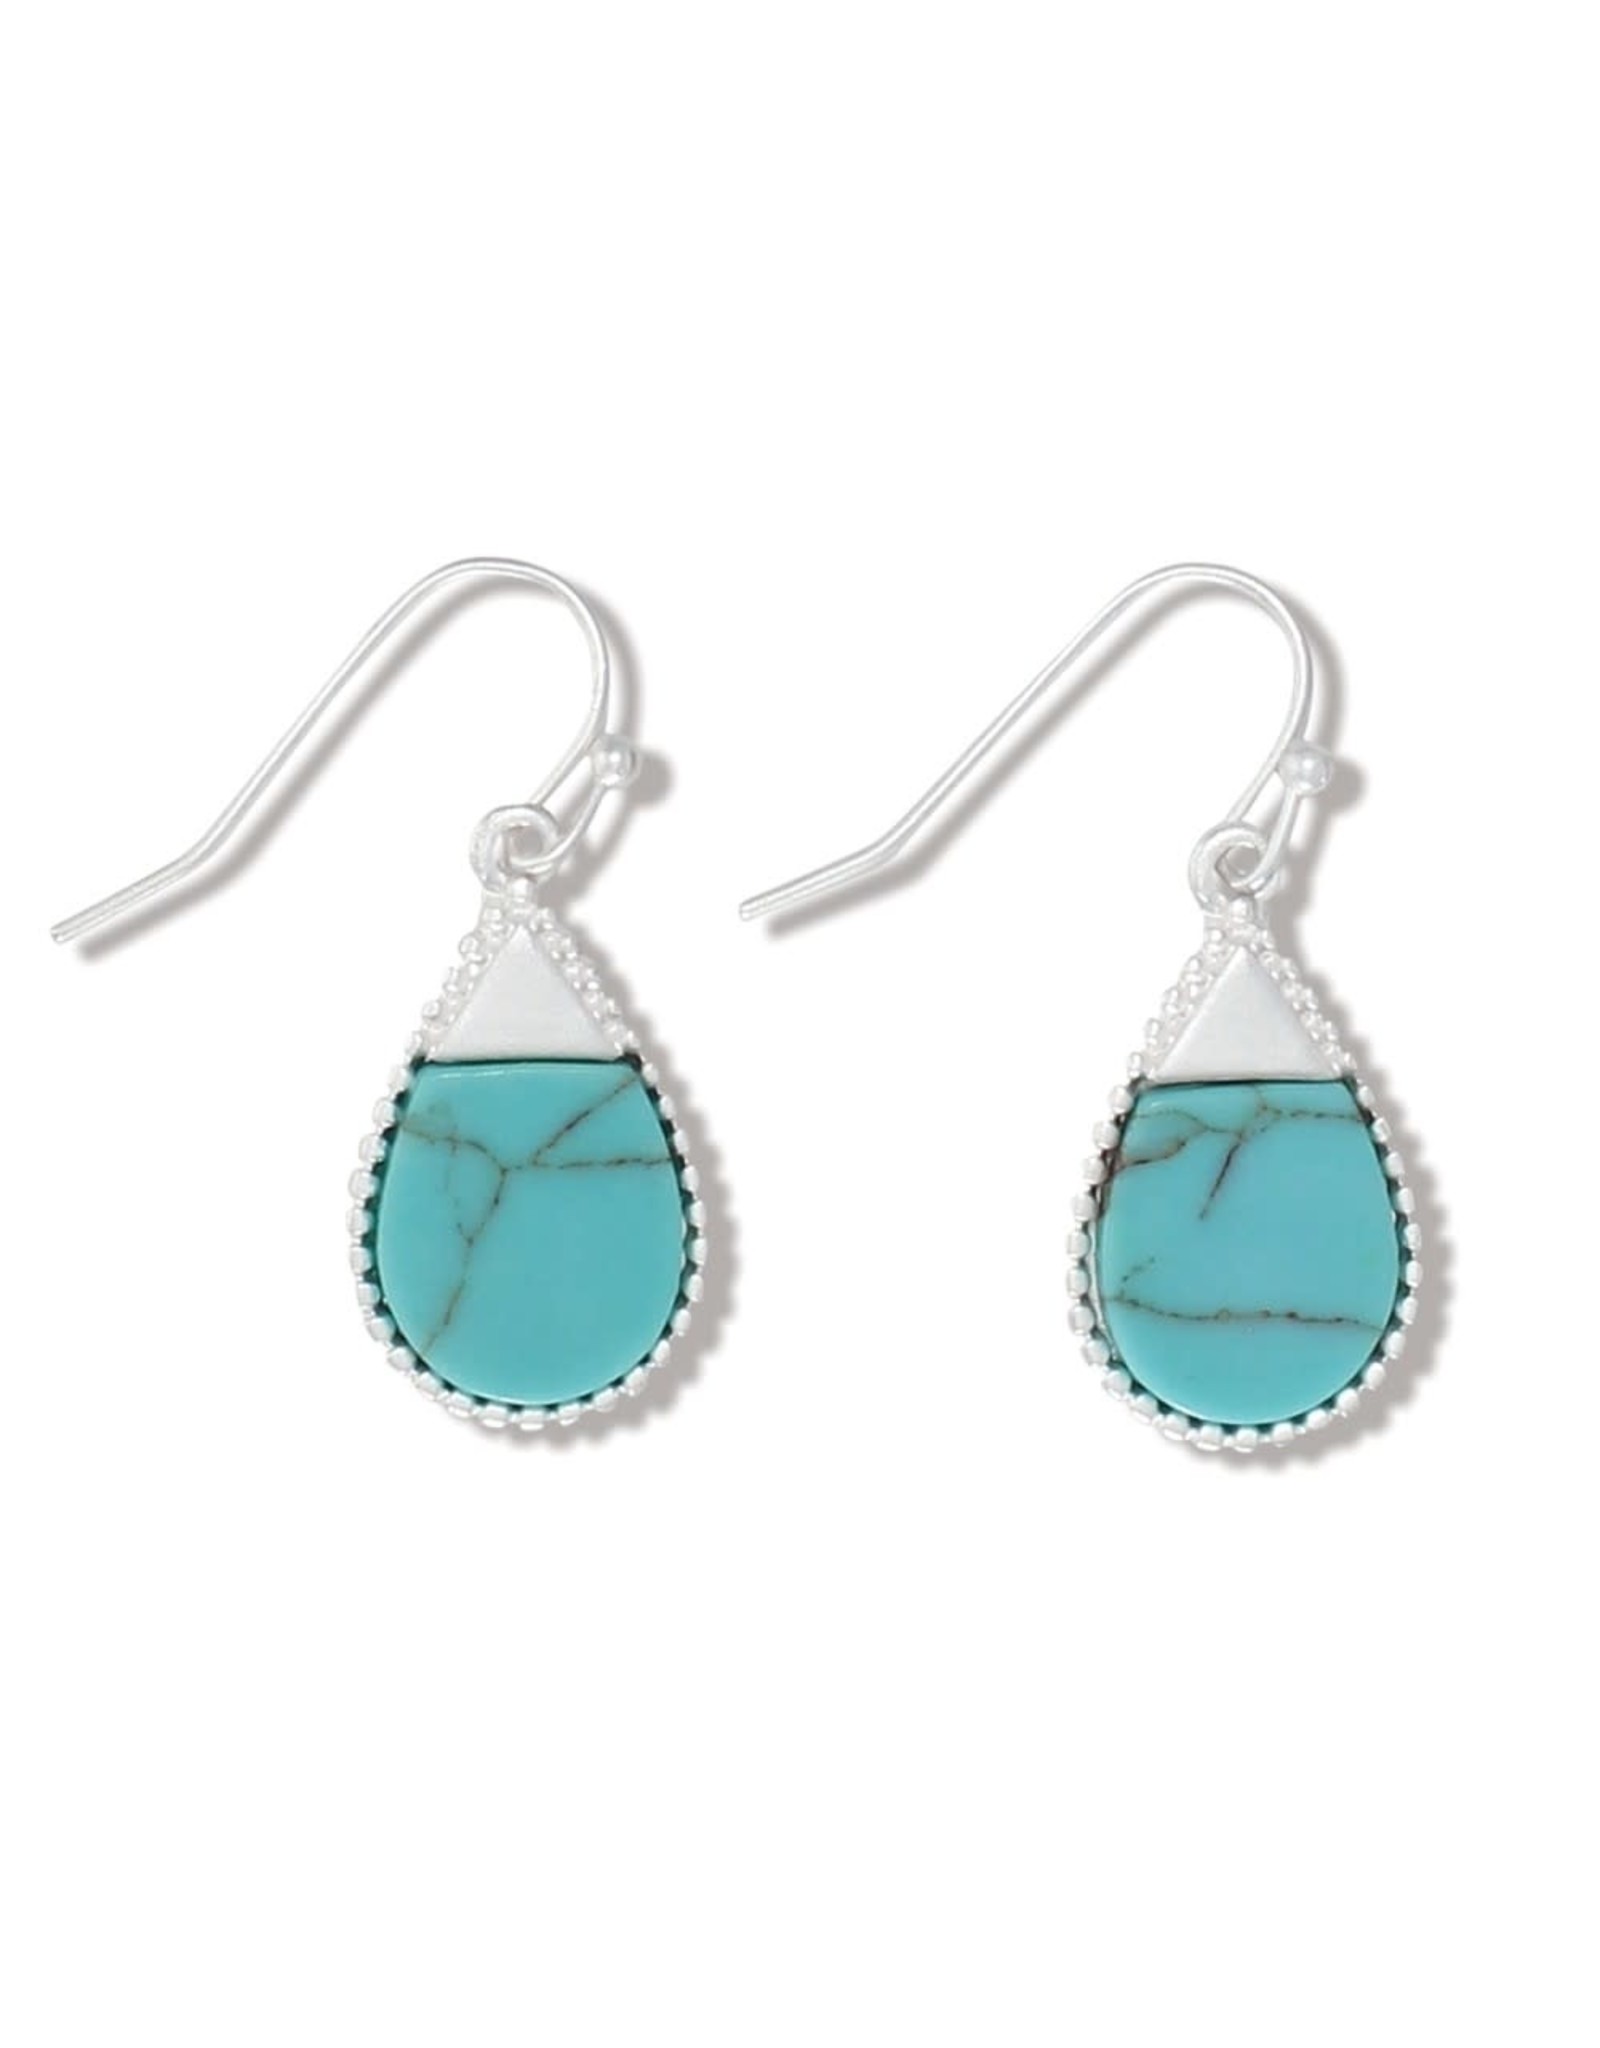 Periwinkle by Barlow Earrings Silver And Turquoise Tear Drops